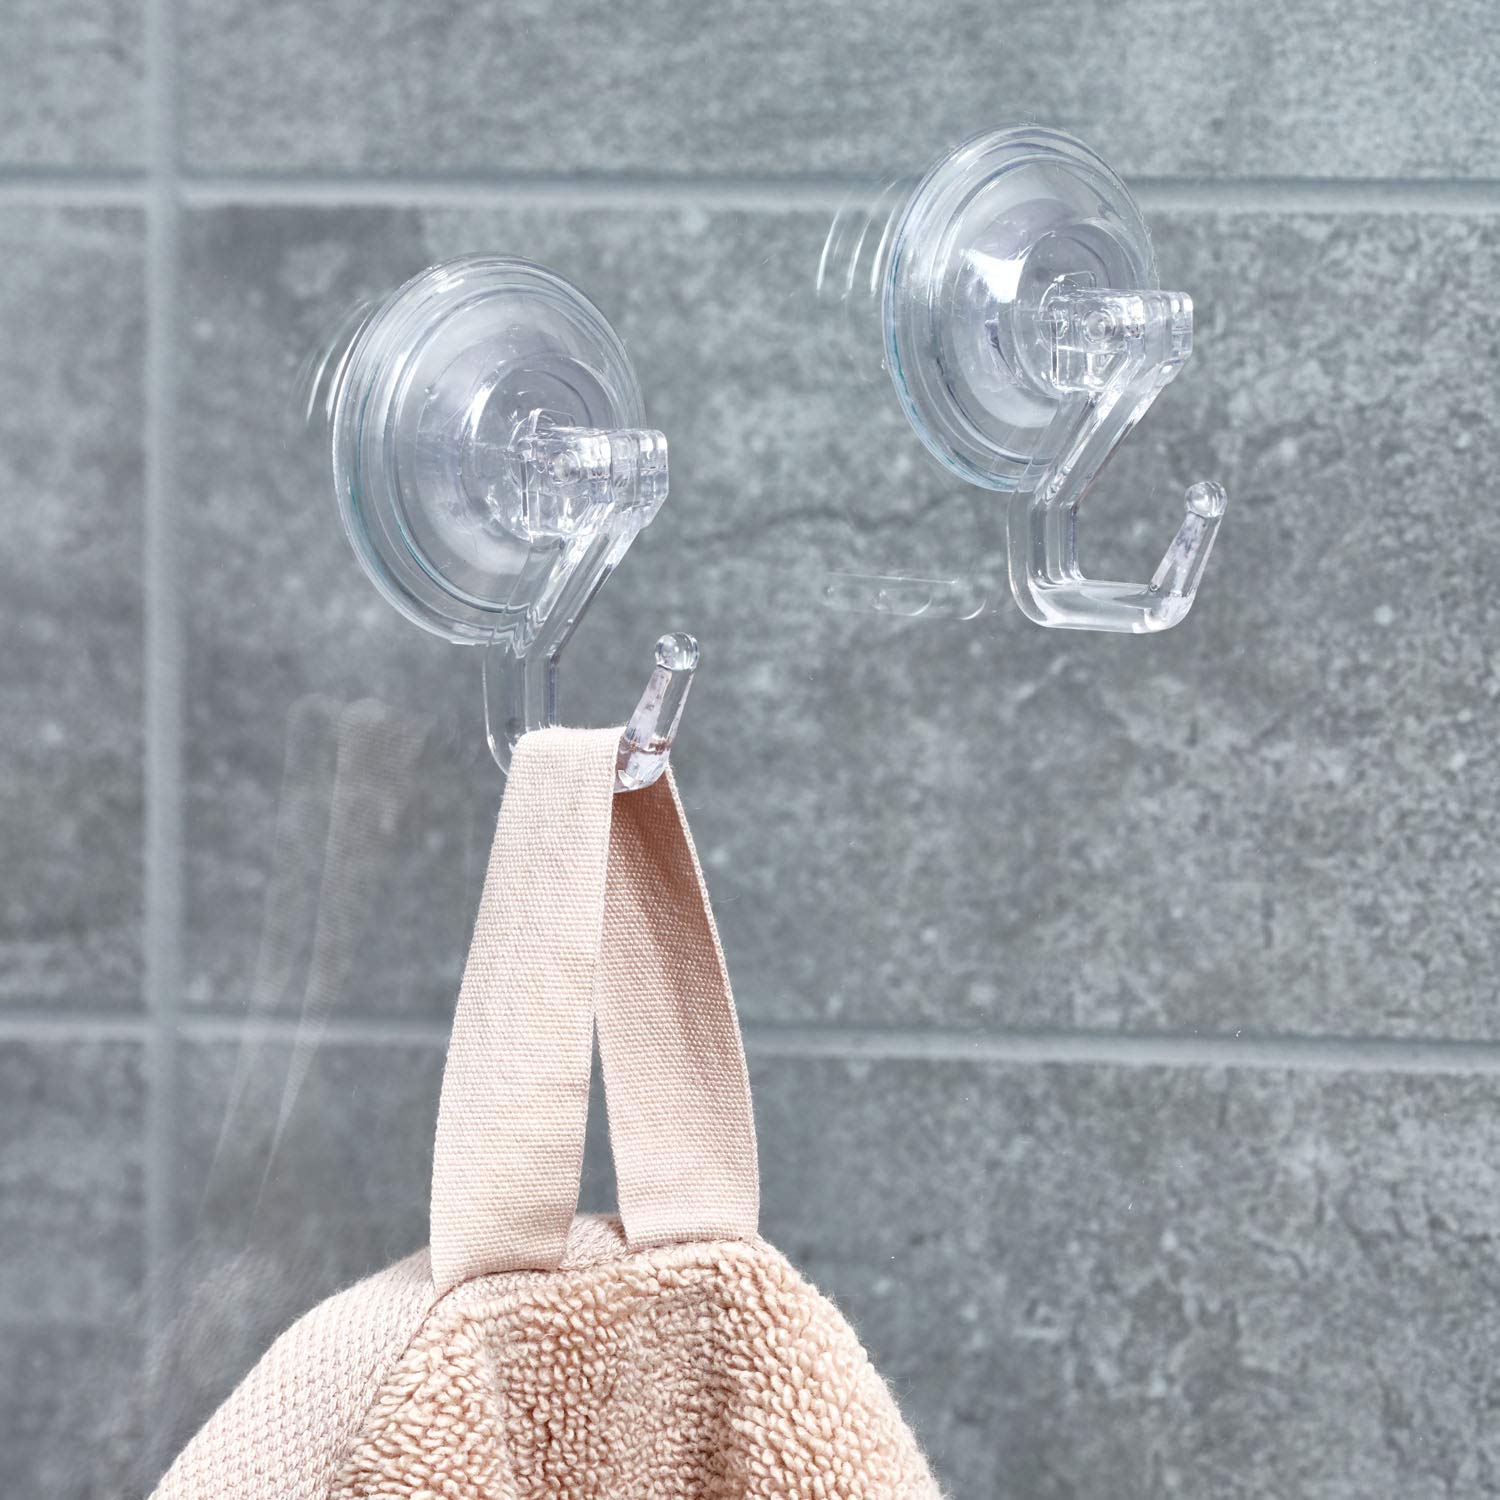 iDesign Power Lock Bathroom Shower Plastic Suction Cup Hooks for Loofah, Towels, Sponges, and More, Set of 2, Clear